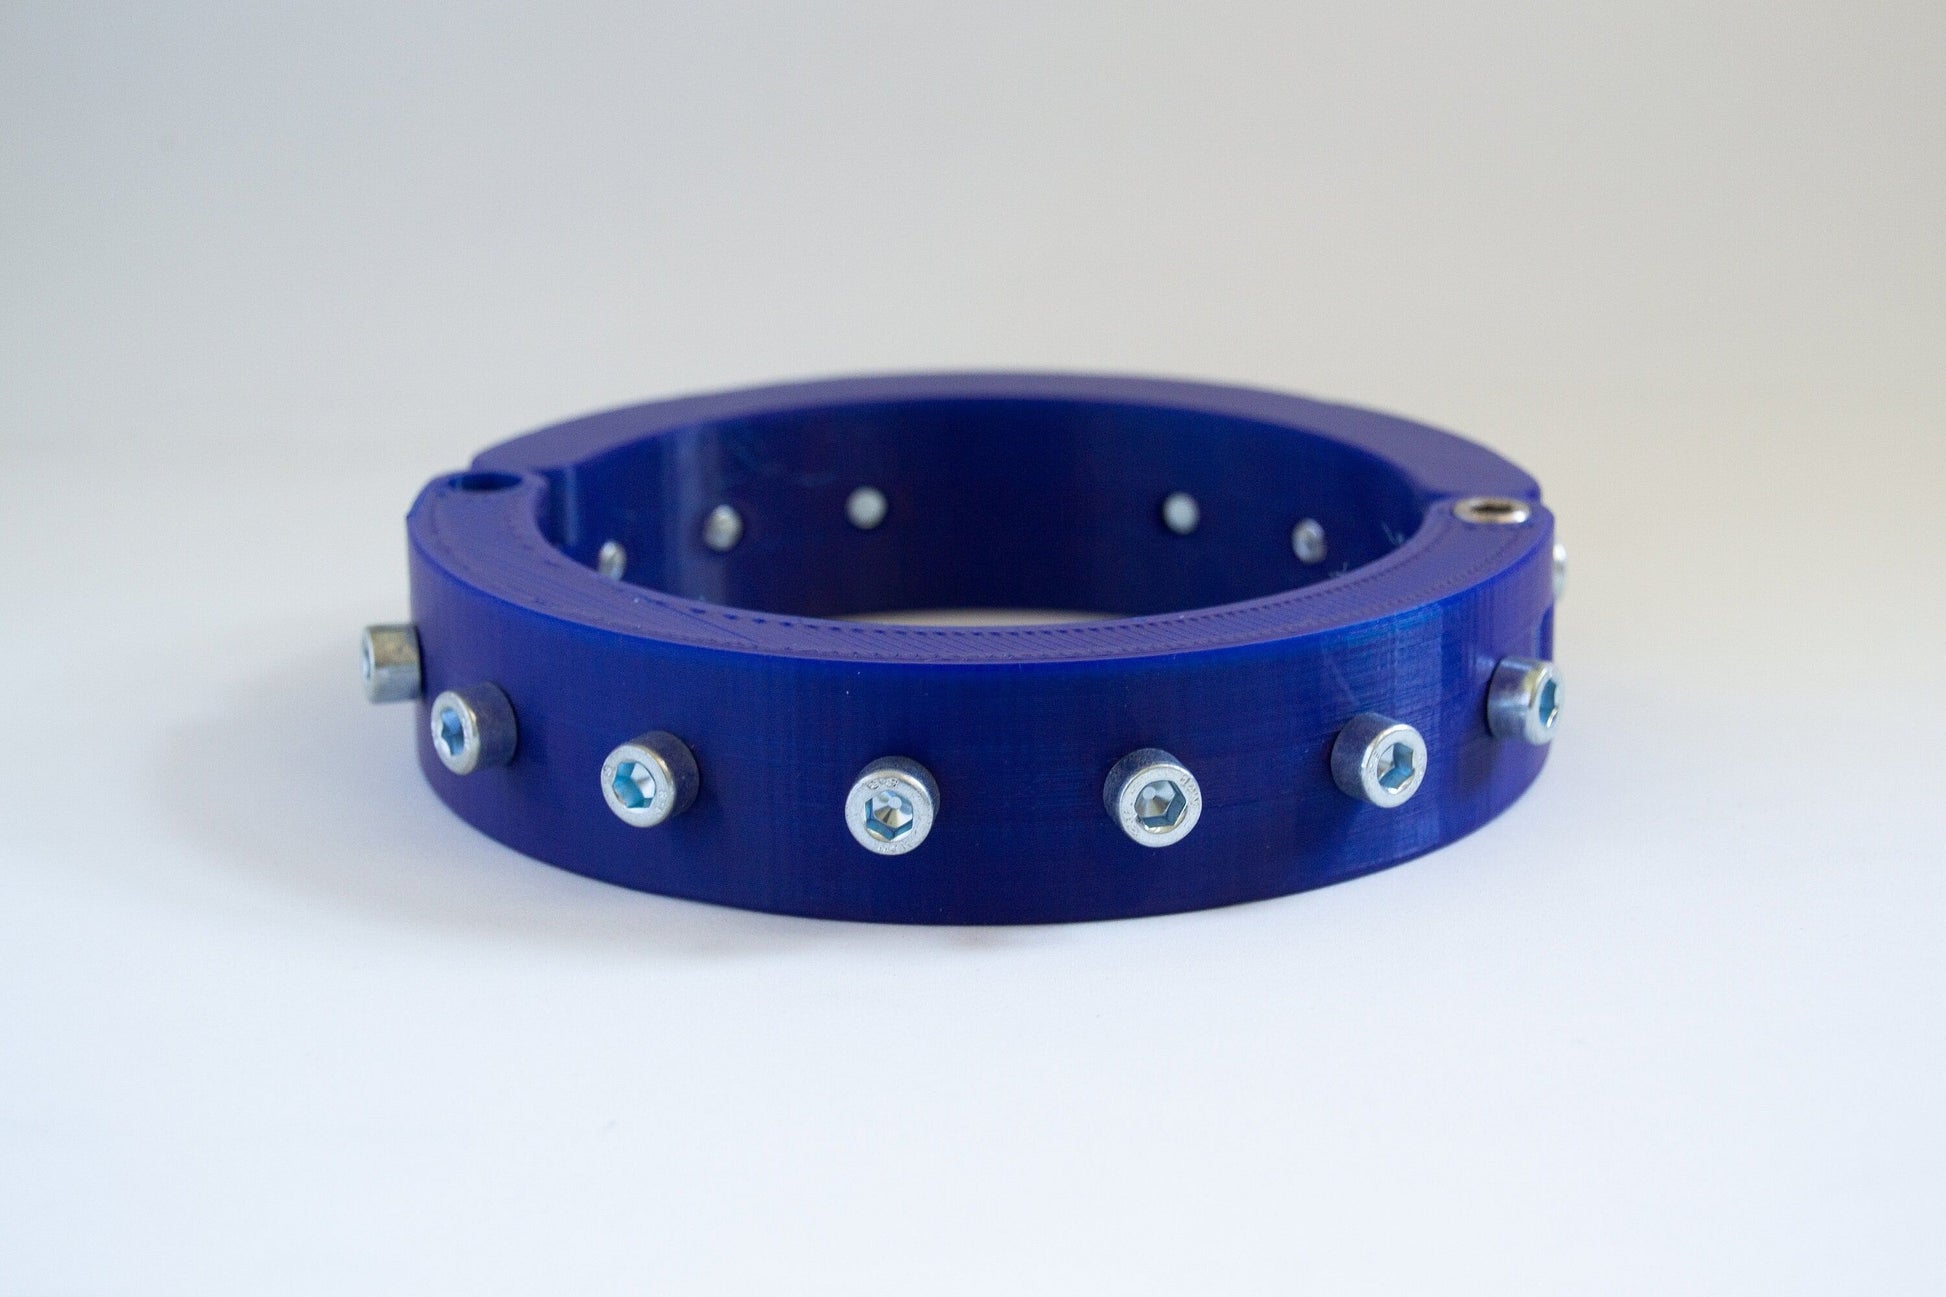 Blue 3d printed bdsm collar adorned with bolts from the side